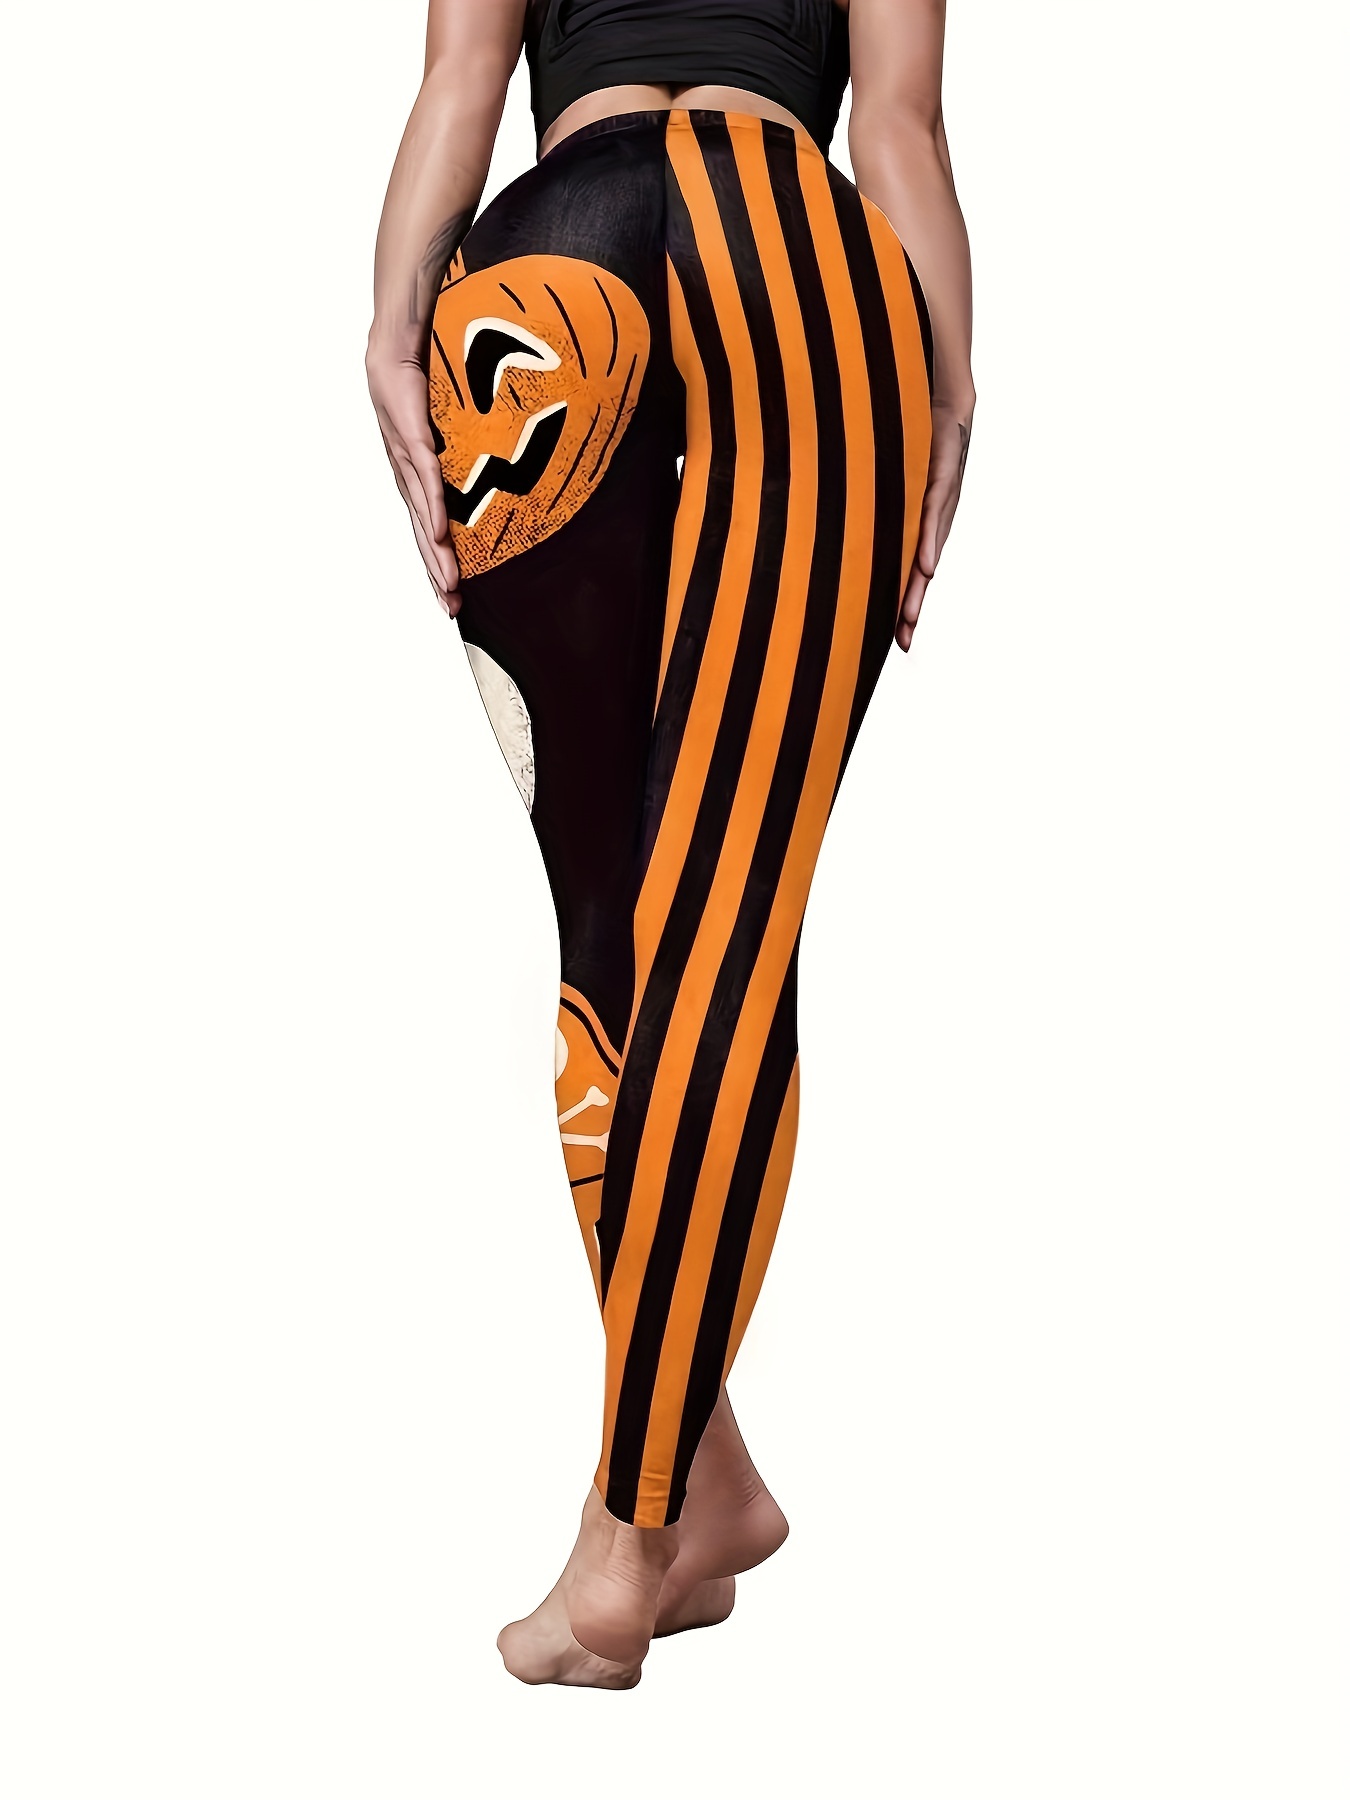 Womens Casual Leggings Halloween Print Stretchy Tight Pants